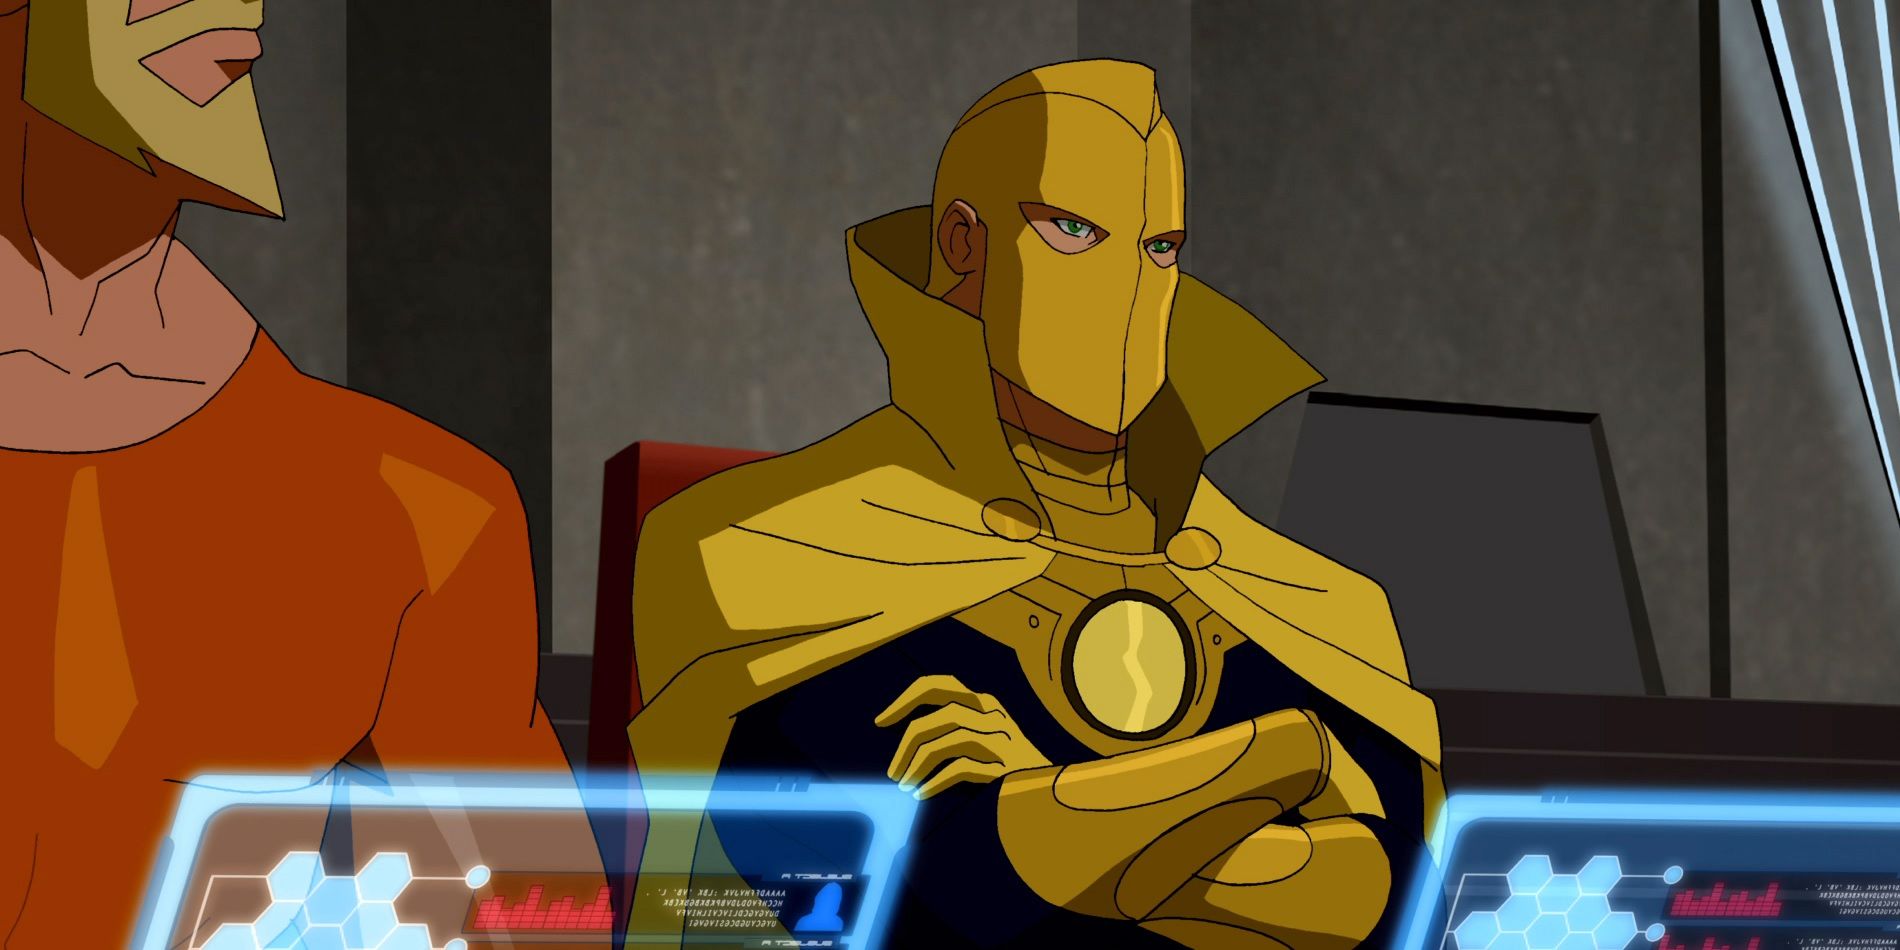 Doctor Fate in "Young Justice"